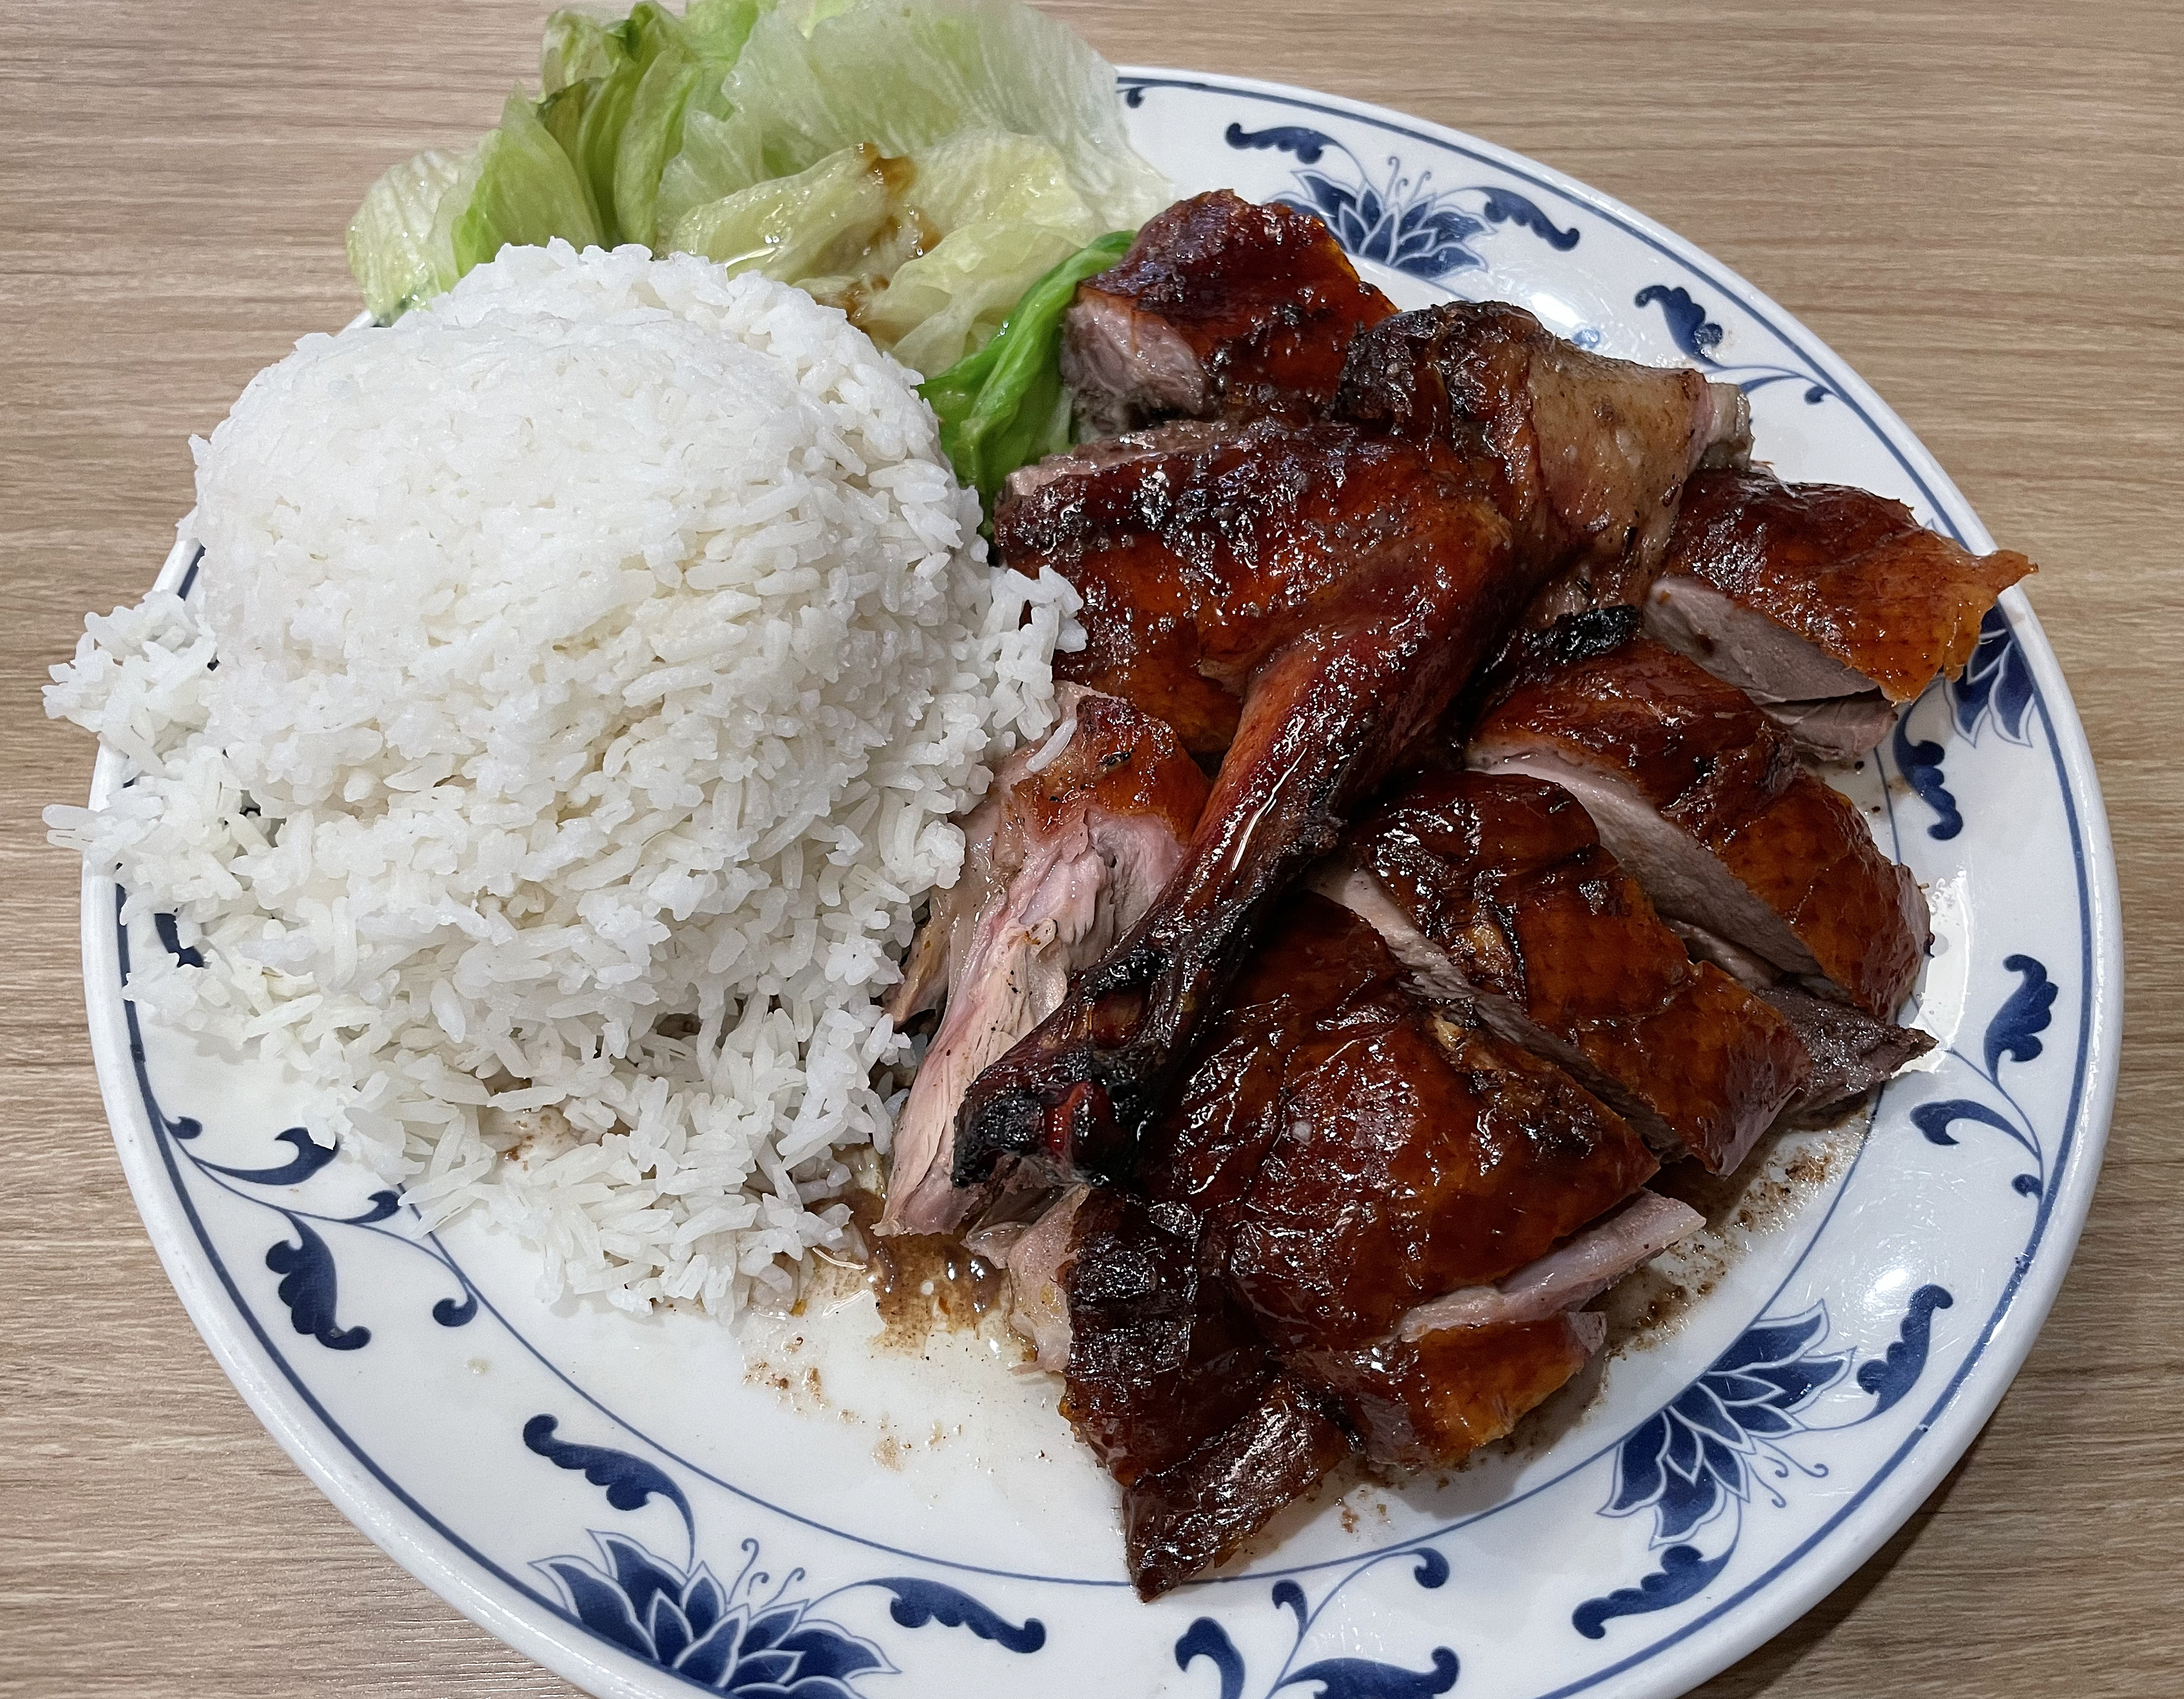 Roasted to a deep mahogany color and painted with sweet-tart sauce, first-rate Chinese-style roasted duck signals that the old Oriental House is fully back in service.